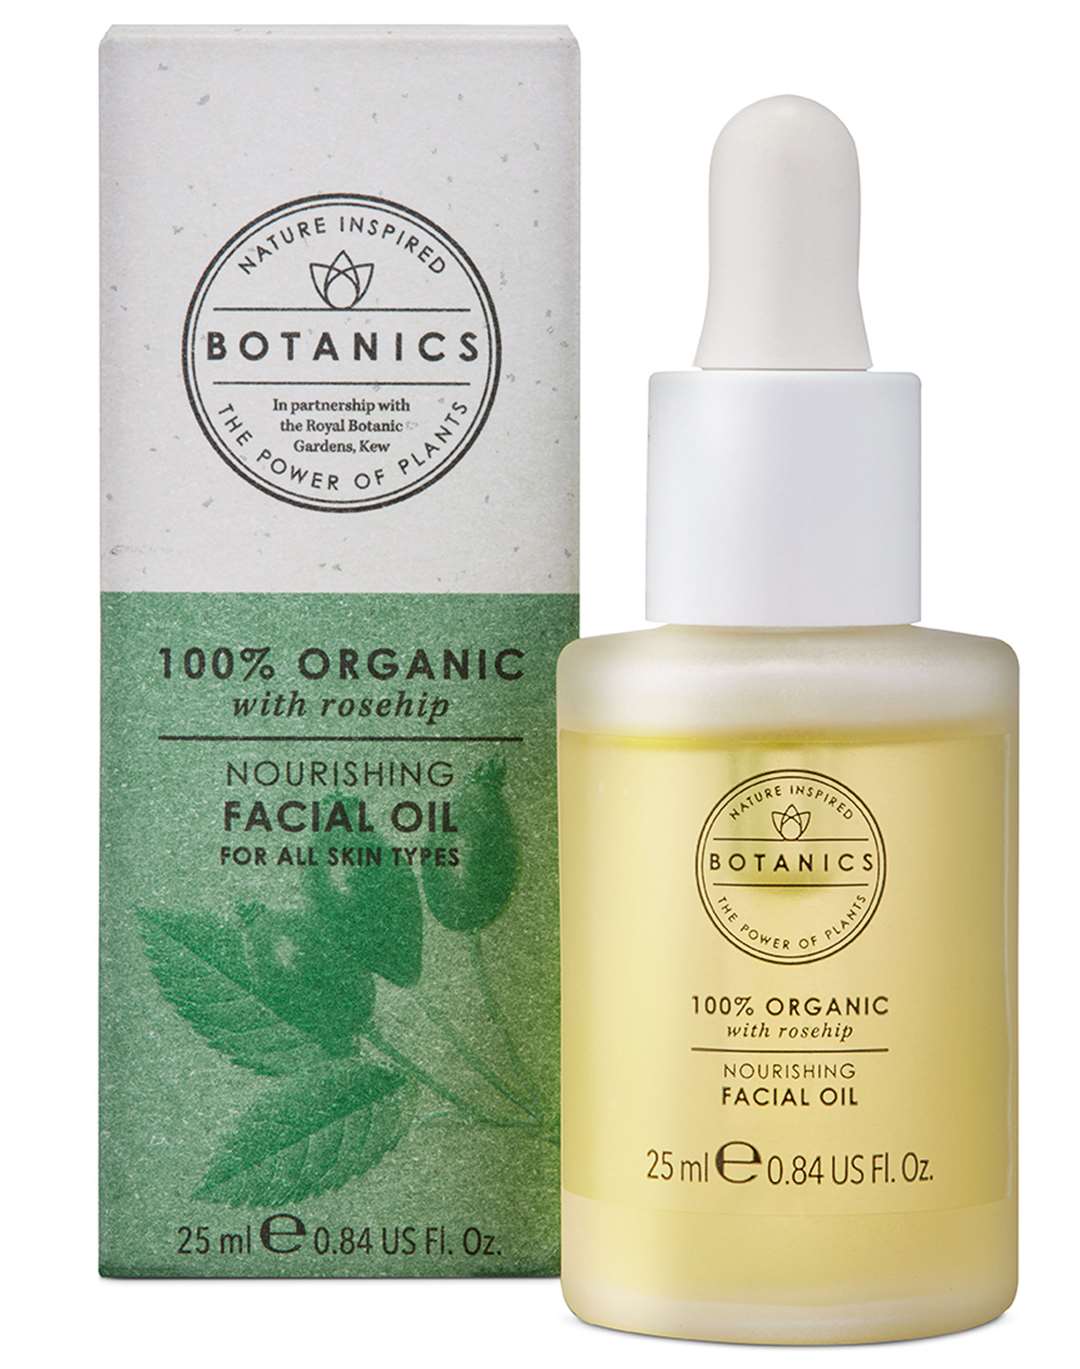 TOP BUY: Botanics Organic Facial Oil, £8.62 (currently reduced from £11.49), Boots